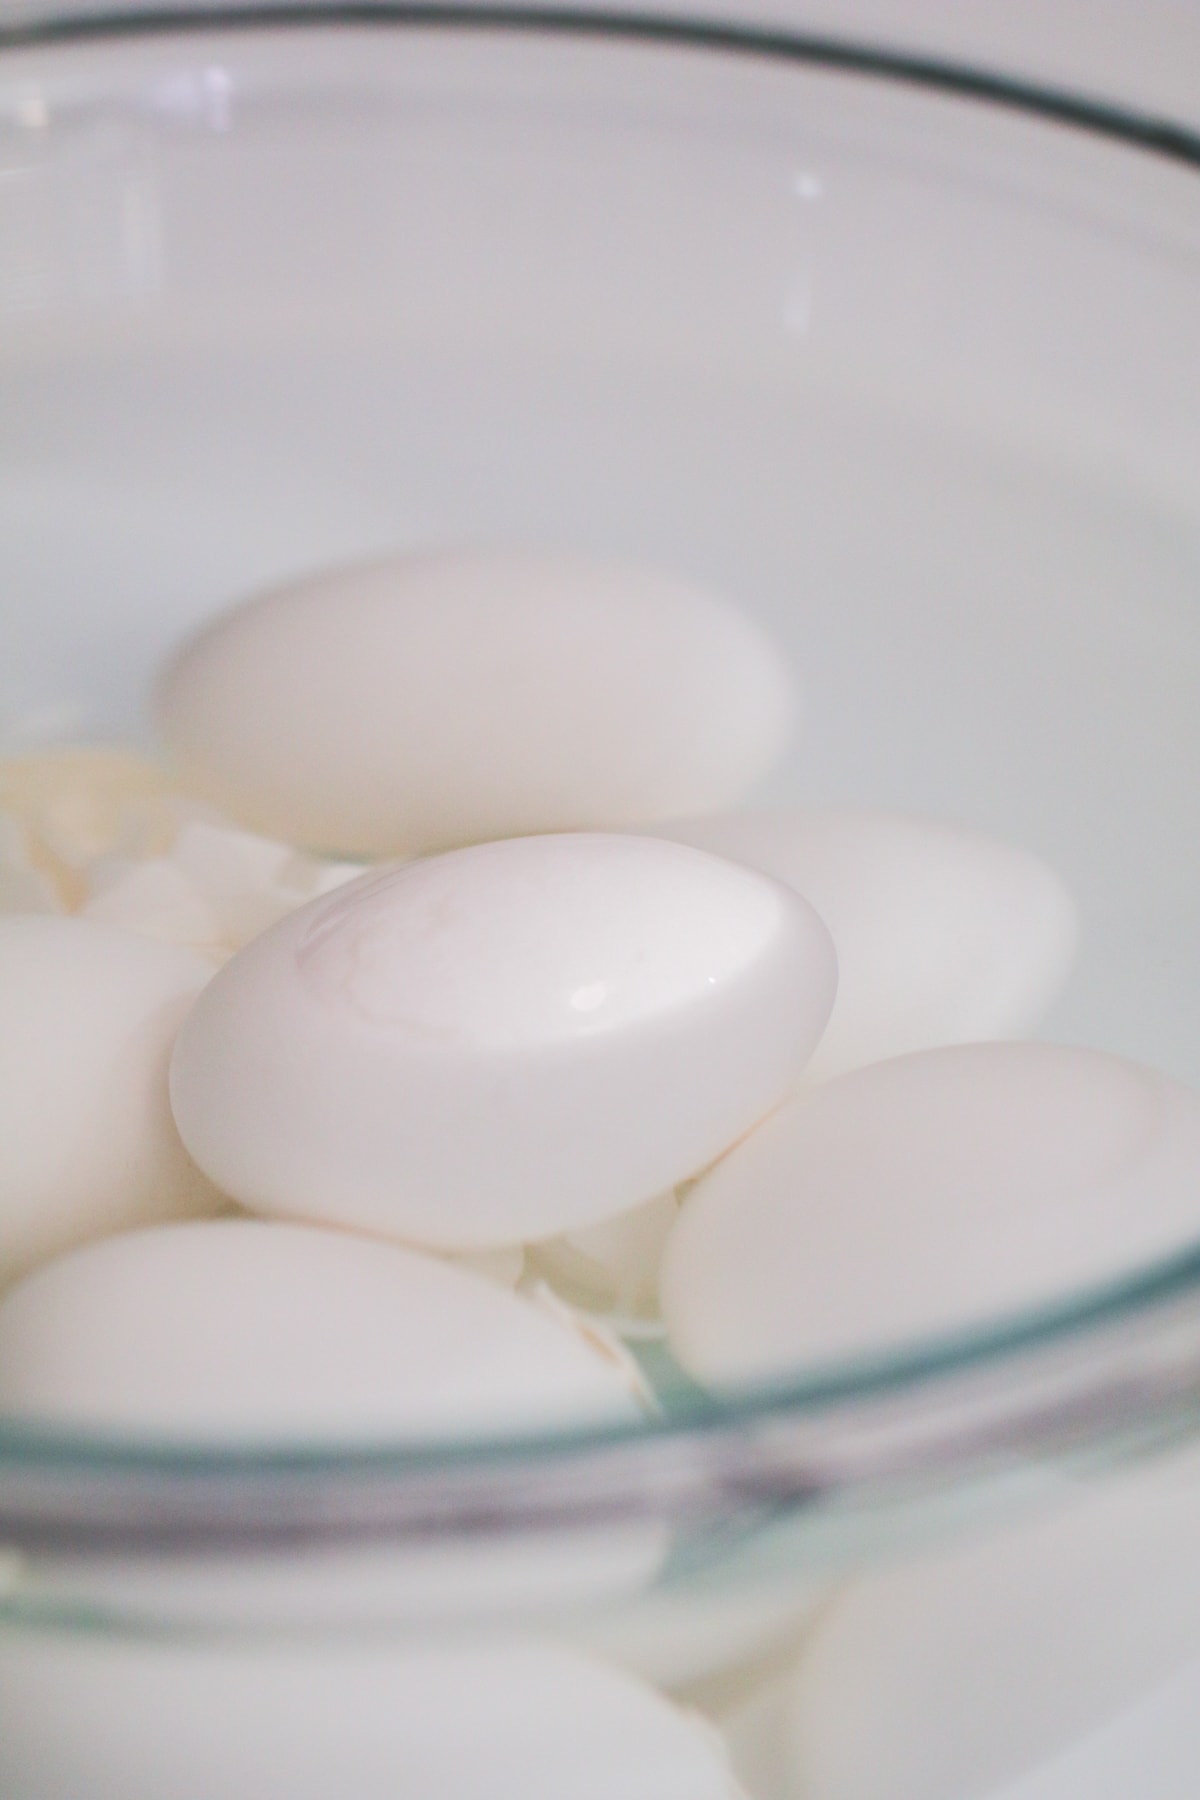 eggs sitting in ice water